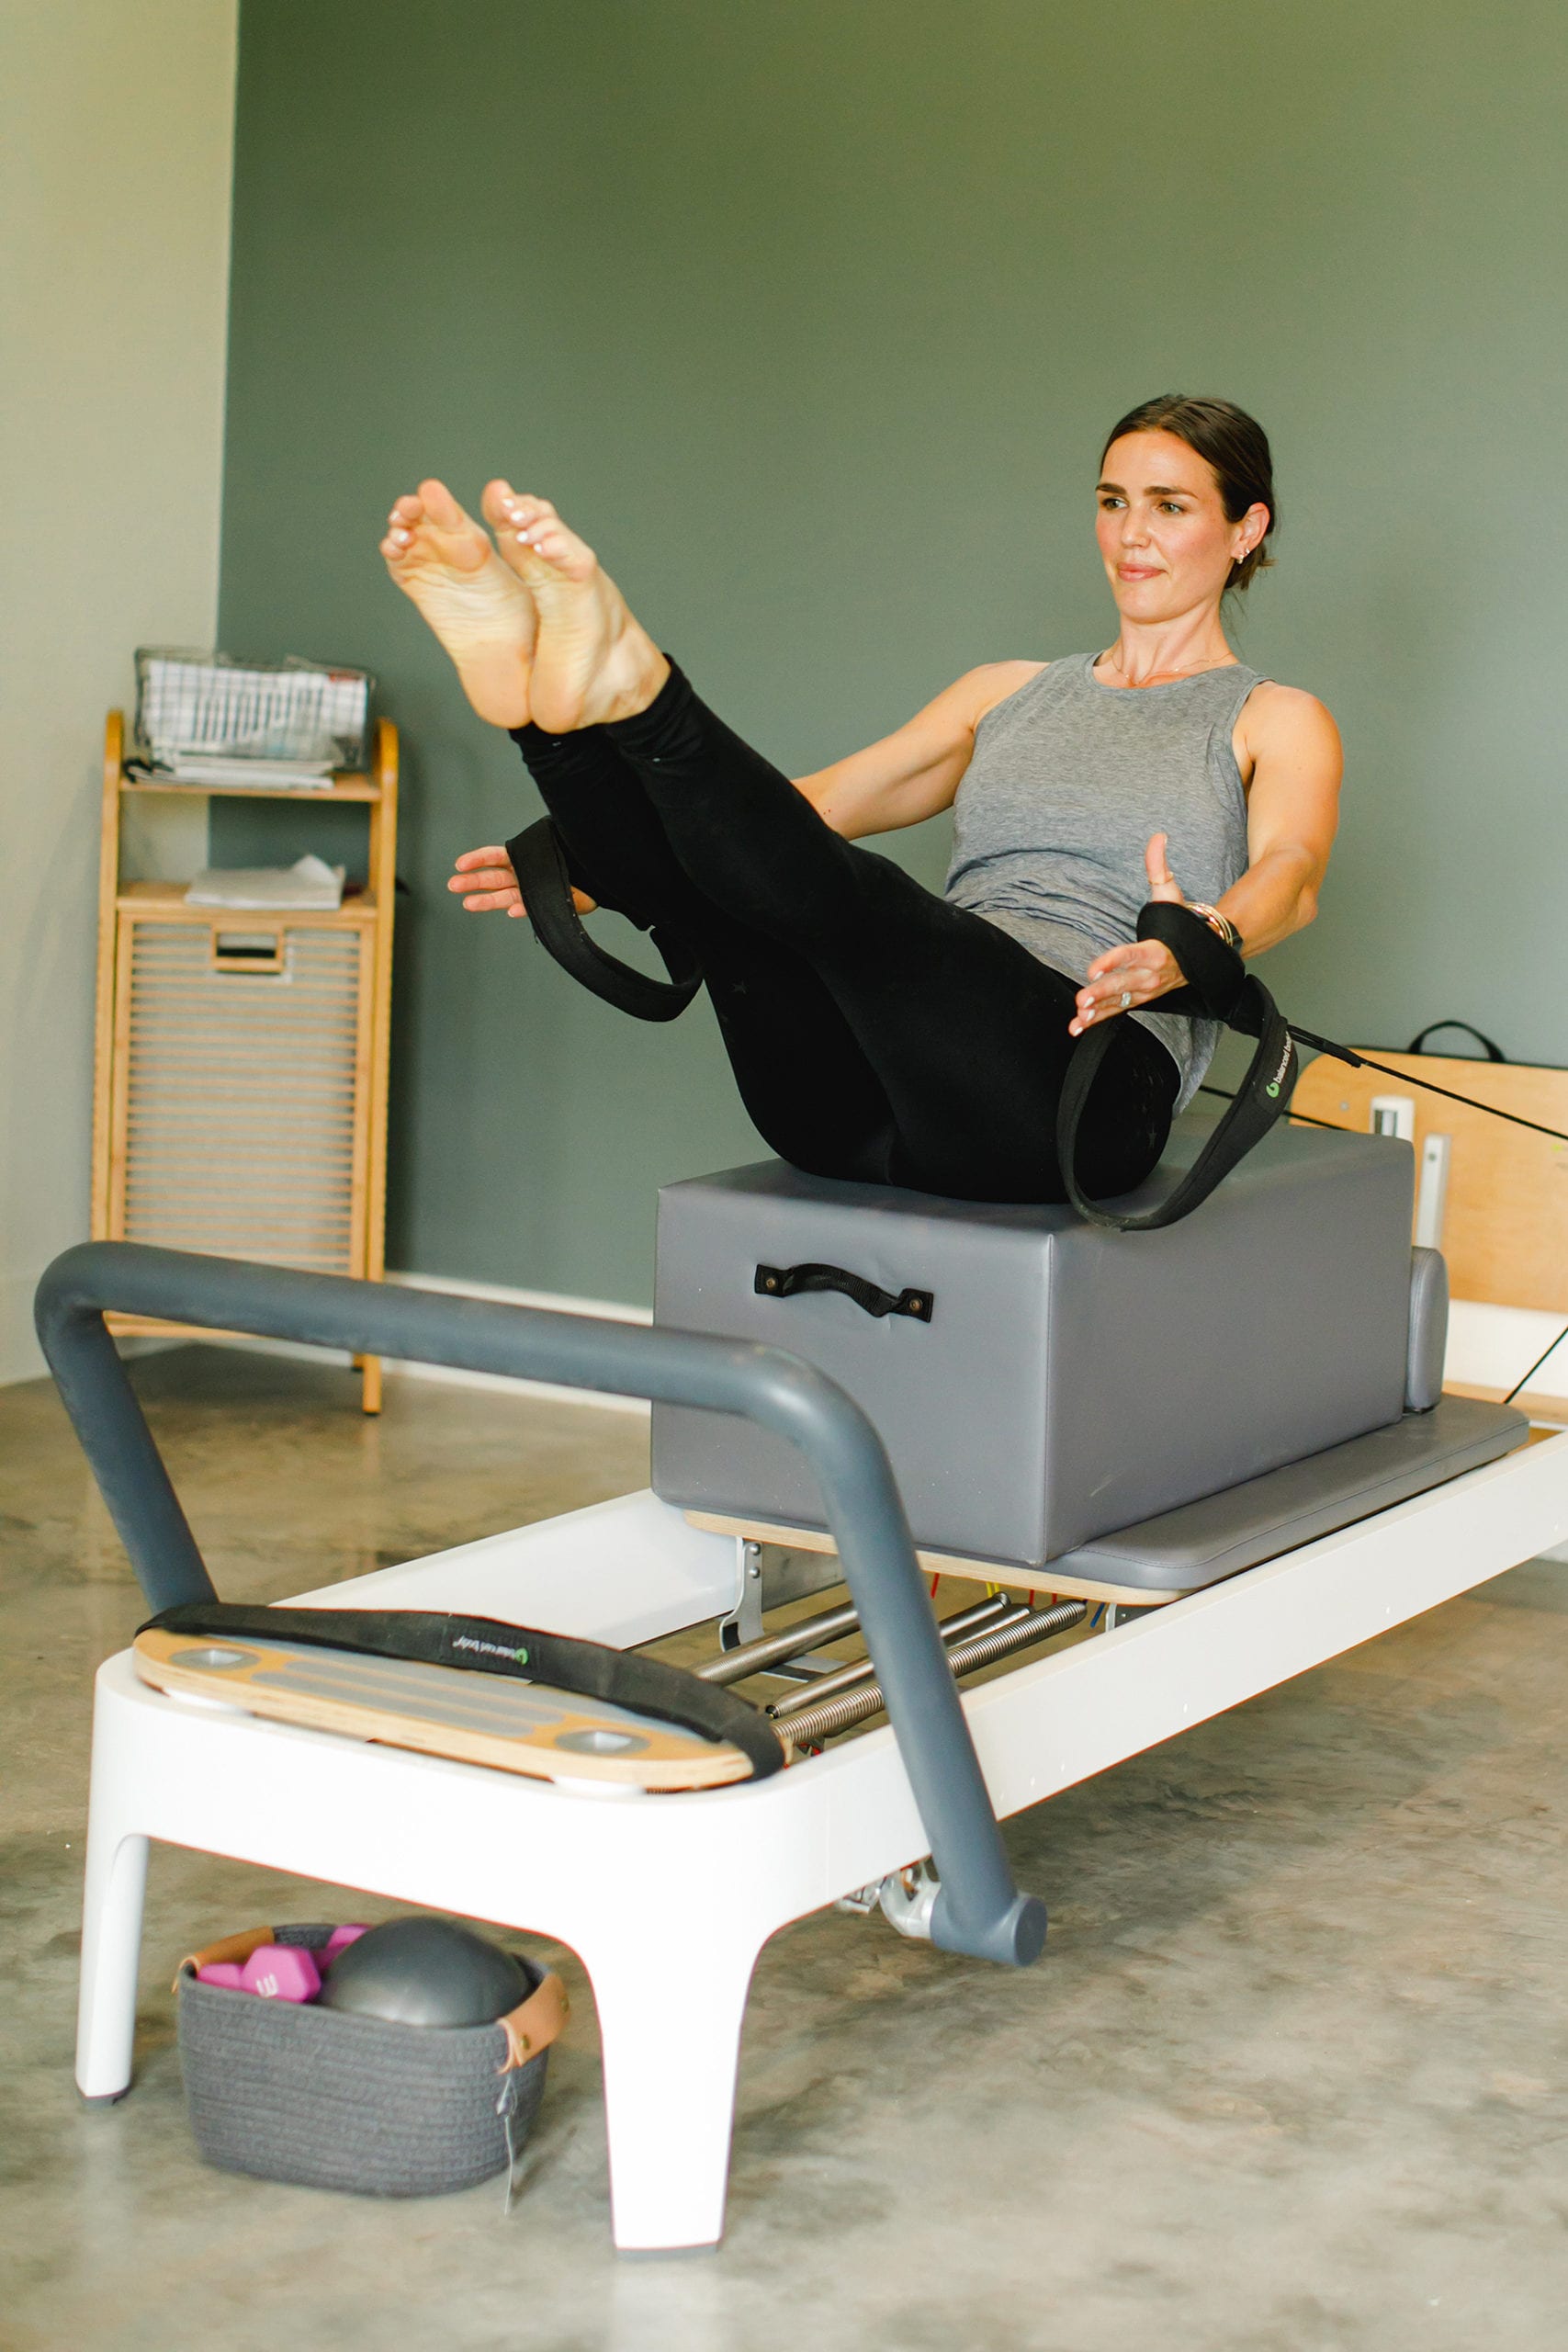 R3 Pilates in Dripping Springs